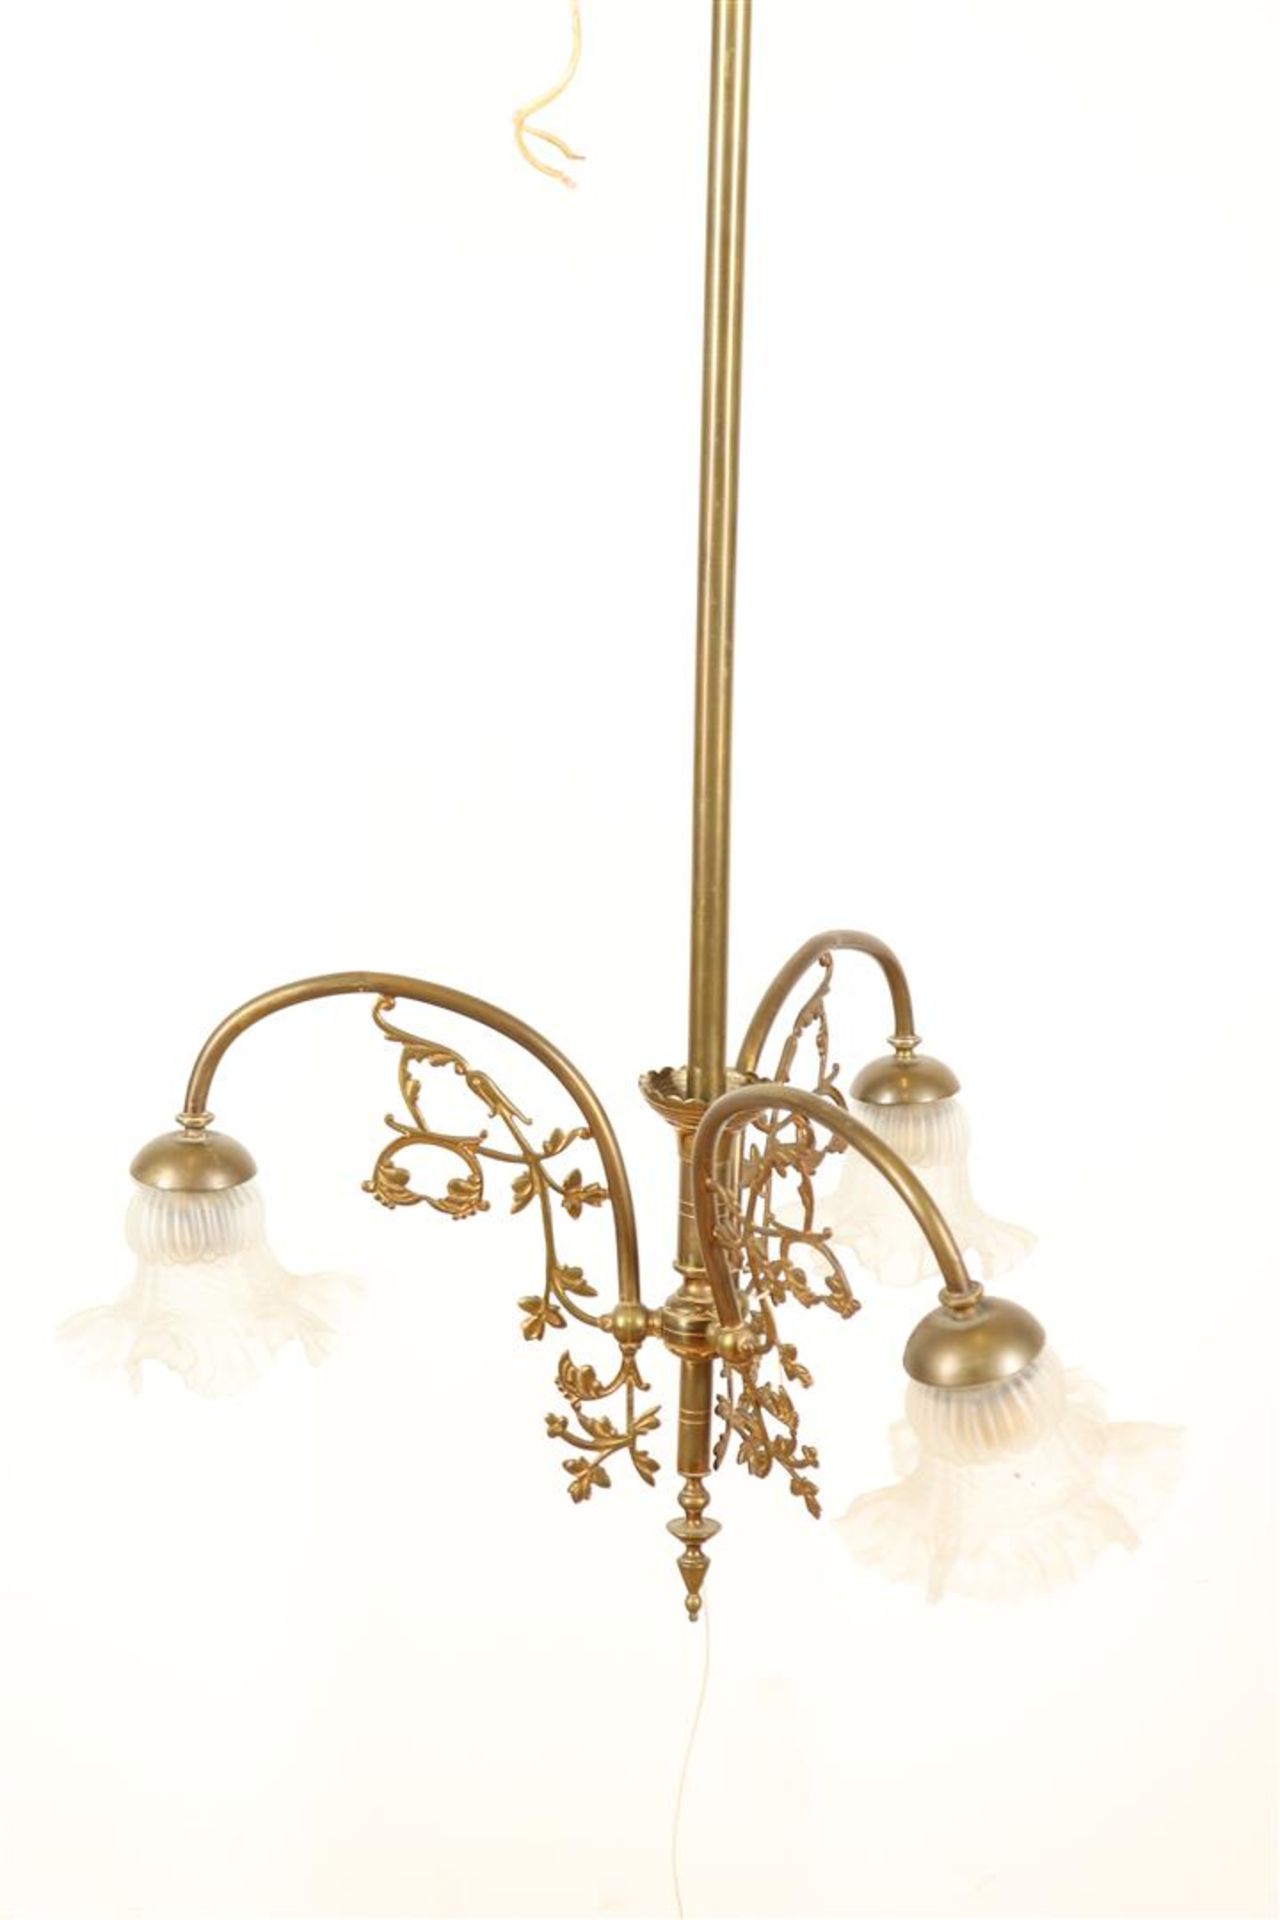 Copper hanging lamp with 3 glass flower shades, height 93 cm.